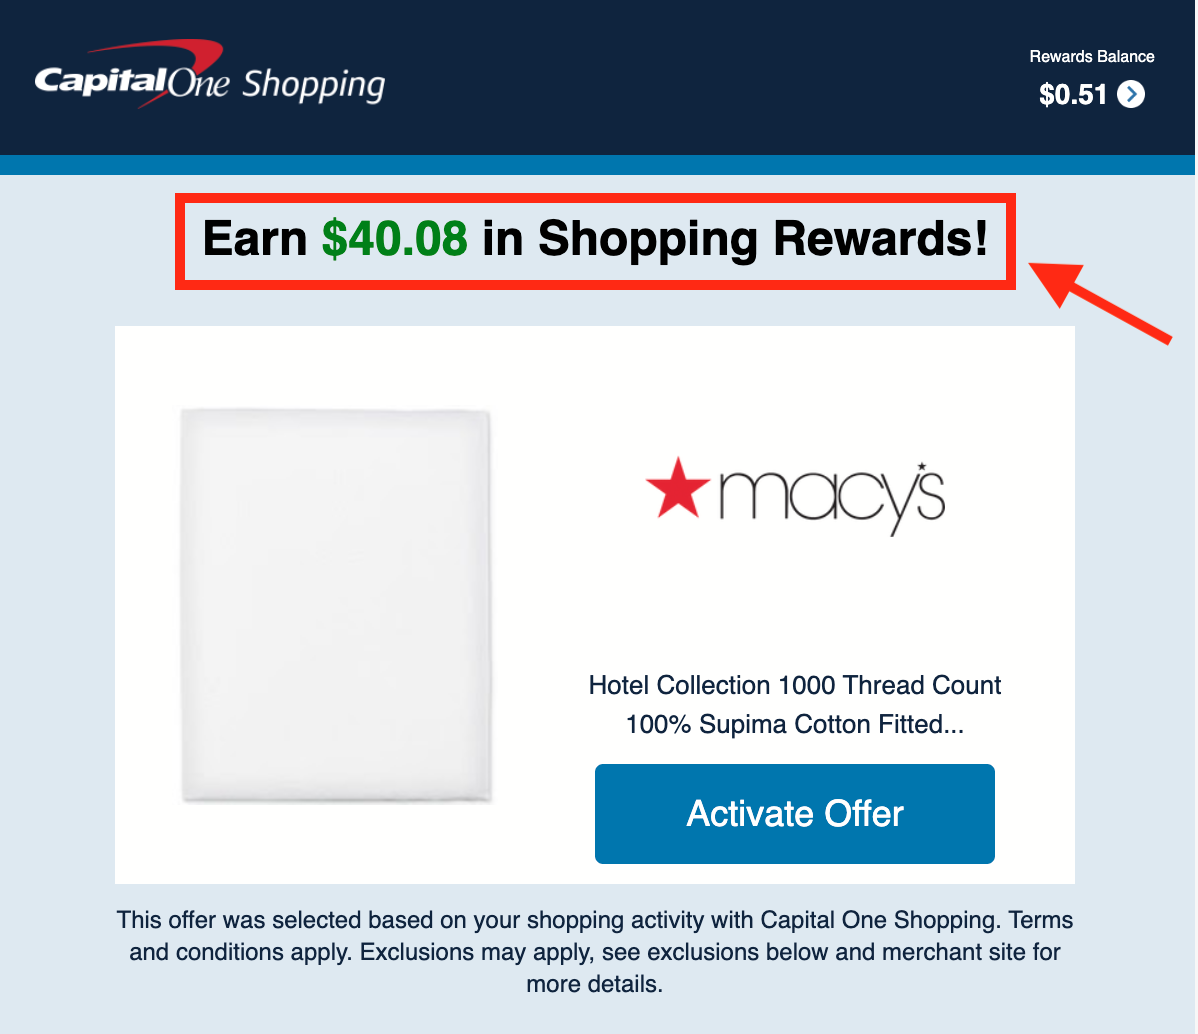 Emailed offer from Capital One Shopping